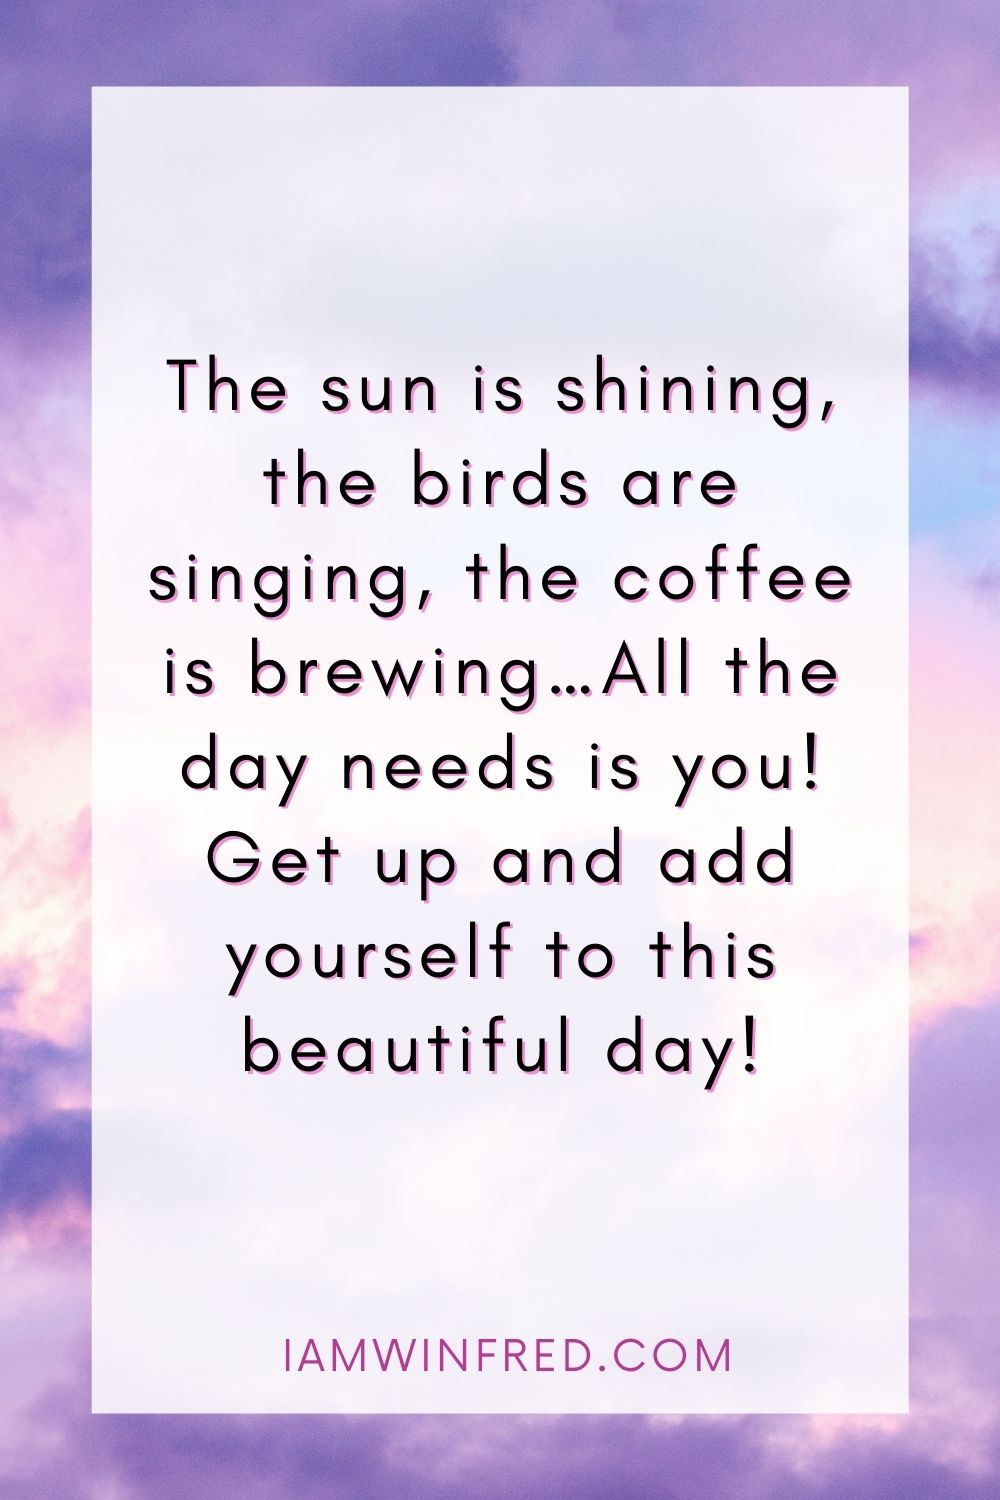 The Sun Is Shining The Birds Are Singing The Coffee Is Brewing…. All The Day Needs Is You Get Up And Add Yourself To This Beautiful Day